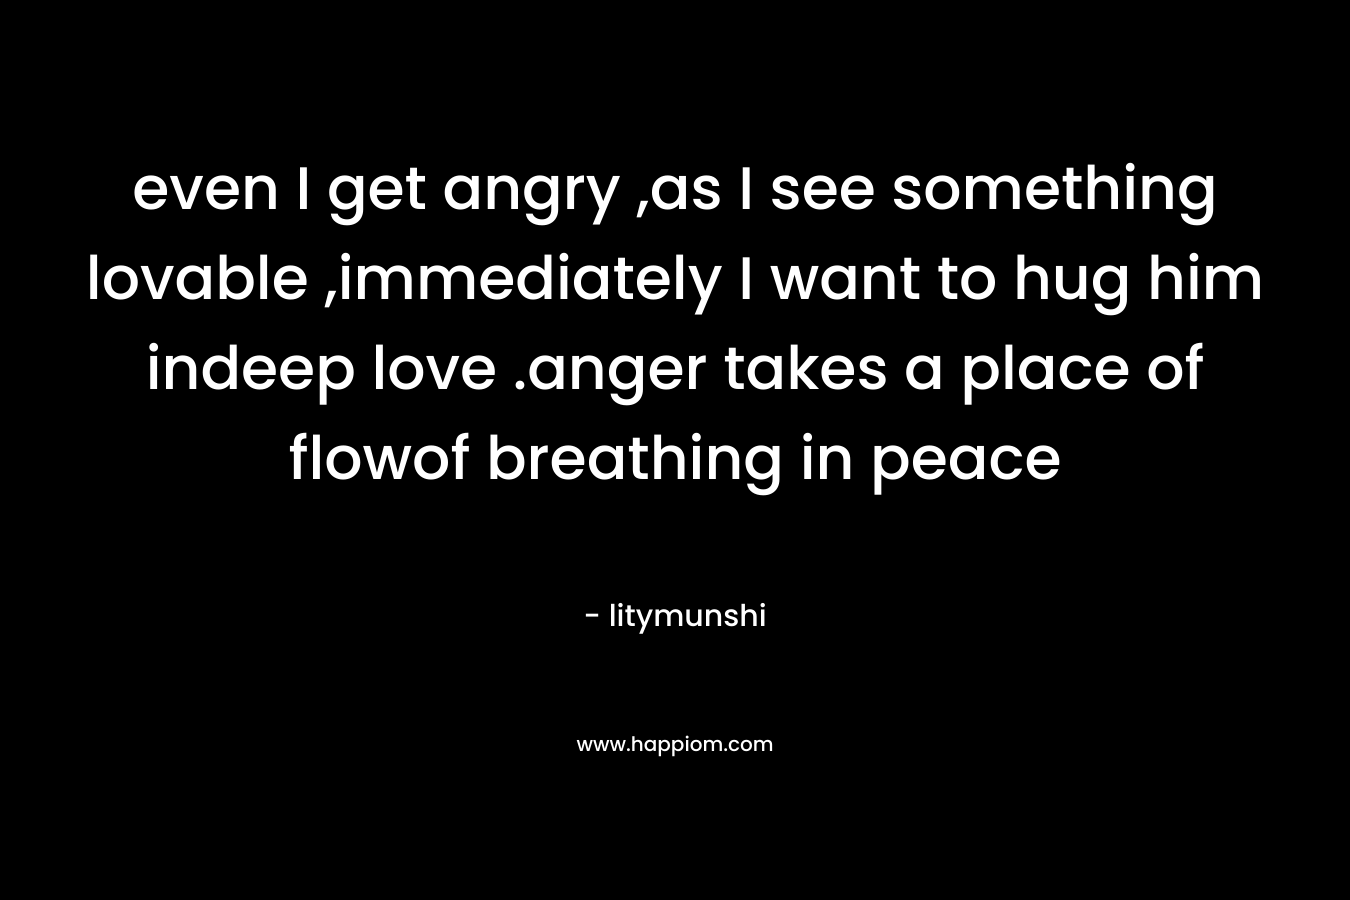 even I get angry ,as I see something lovable ,immediately I want to hug him indeep love .anger takes a place of flowof breathing in peace